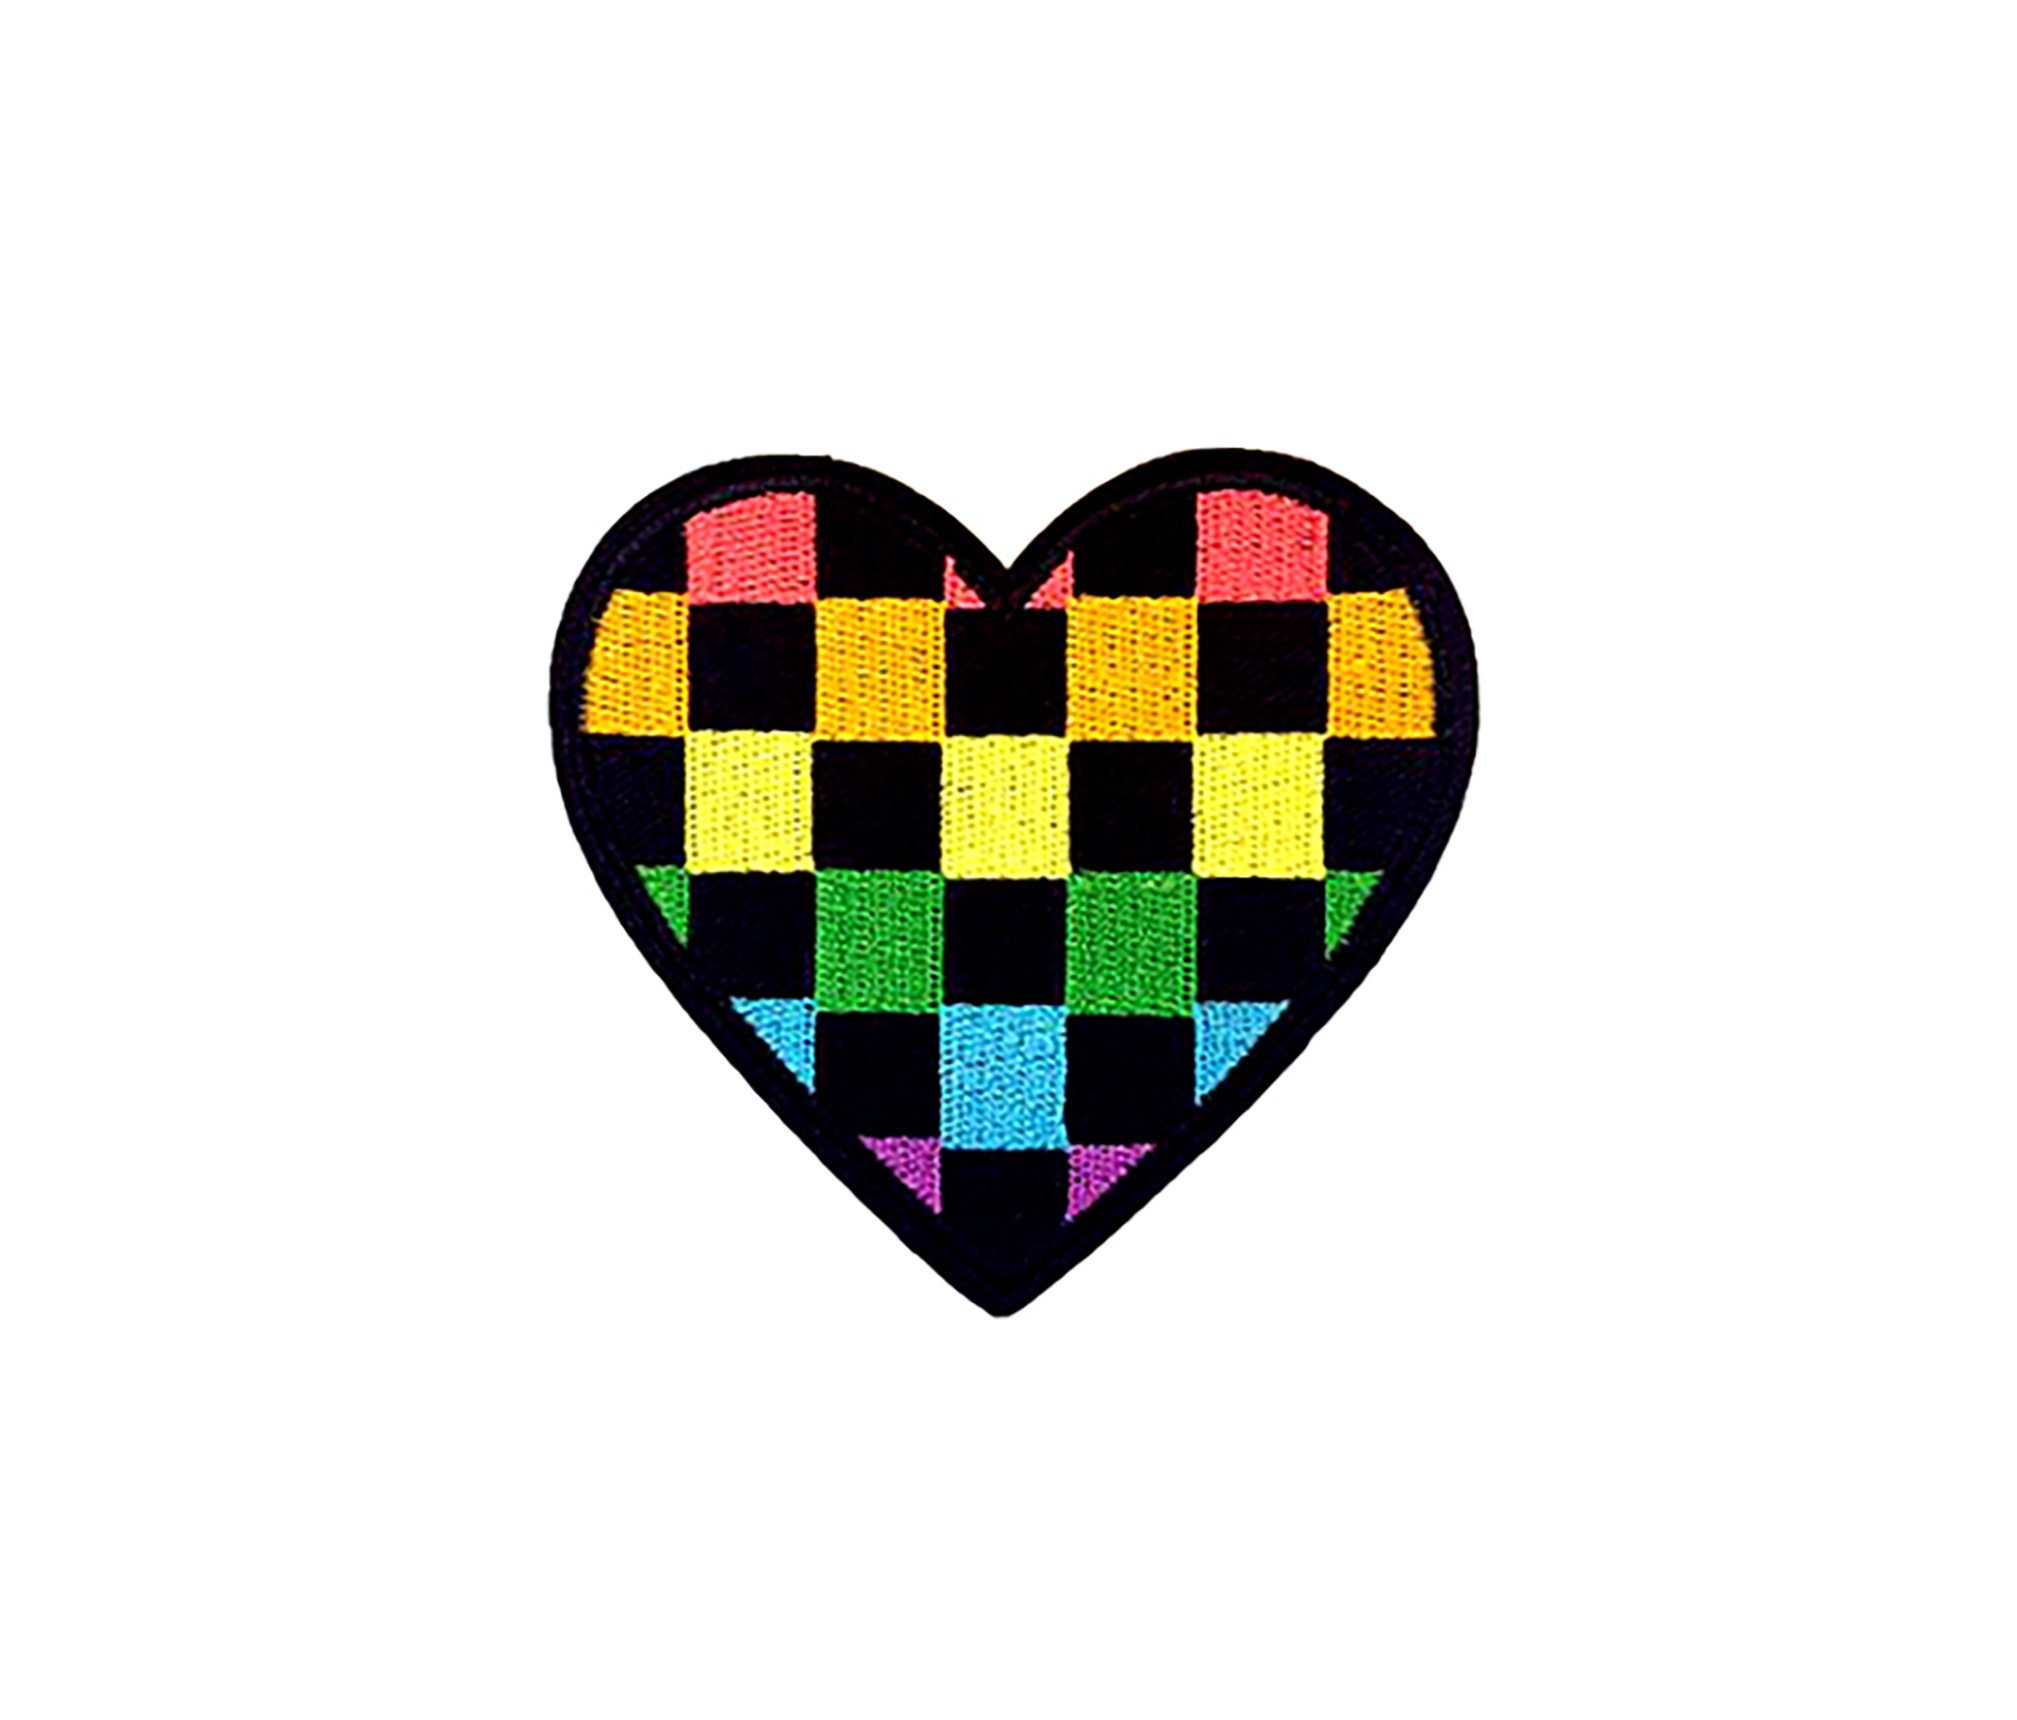 Punk Skater Backpack Lapel Jacket Accessory DIY Novelty Badge Rainbow Checkered Heart Patch Pride Heart Checker Love Iron-On Applique